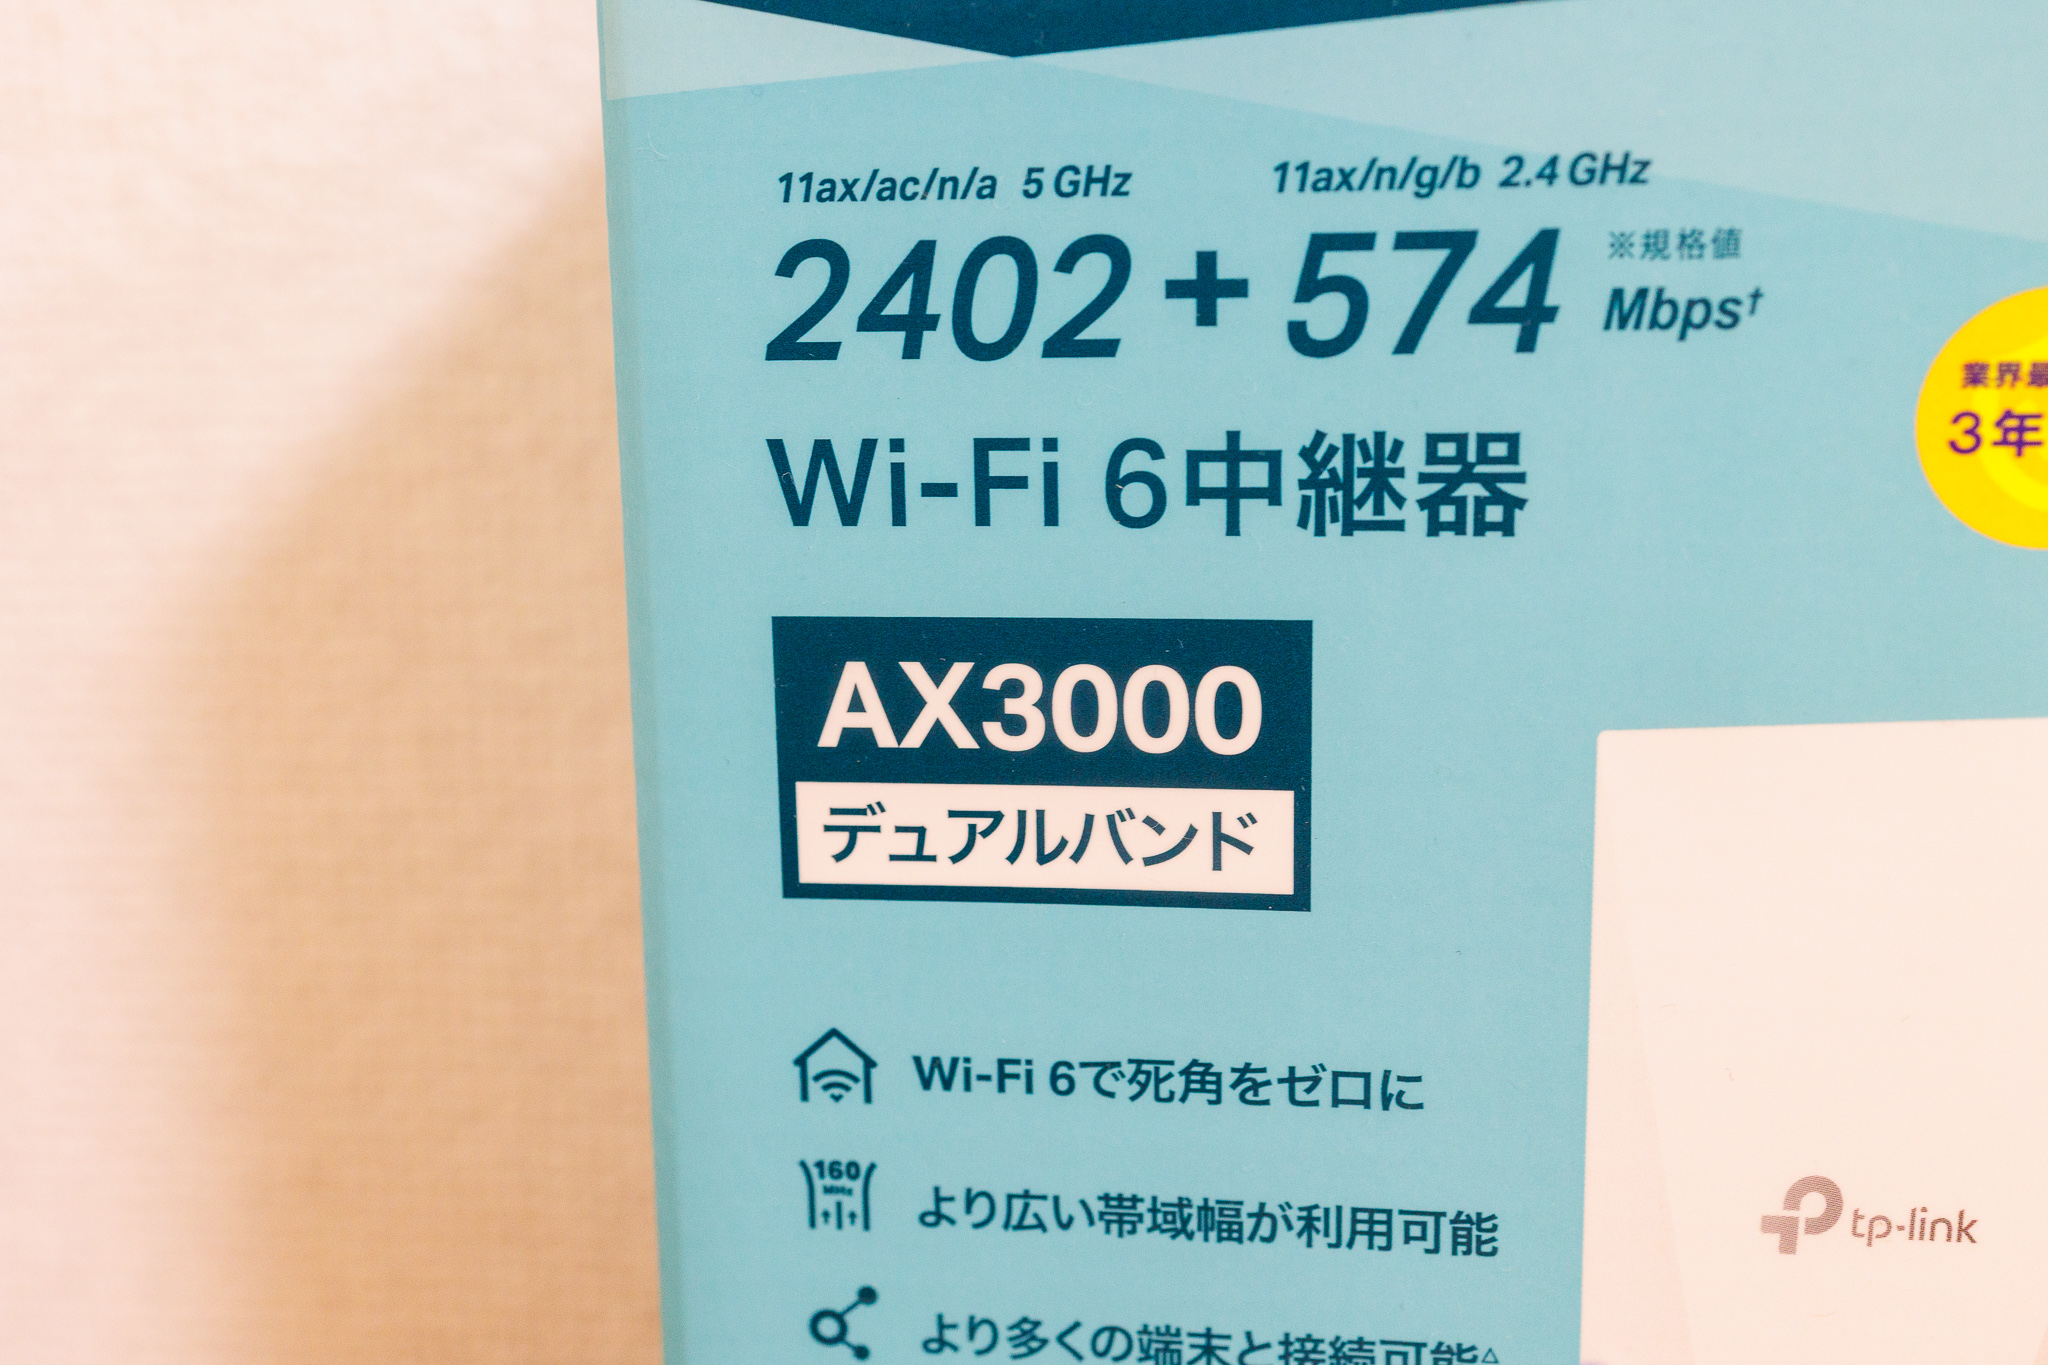 TP-Link Wi-Fi 6中継機RE700Xレビュー！3000Mbpsクラスのもはや高速Wi-Fiルーター | ゴーゴーシンゴのブログ